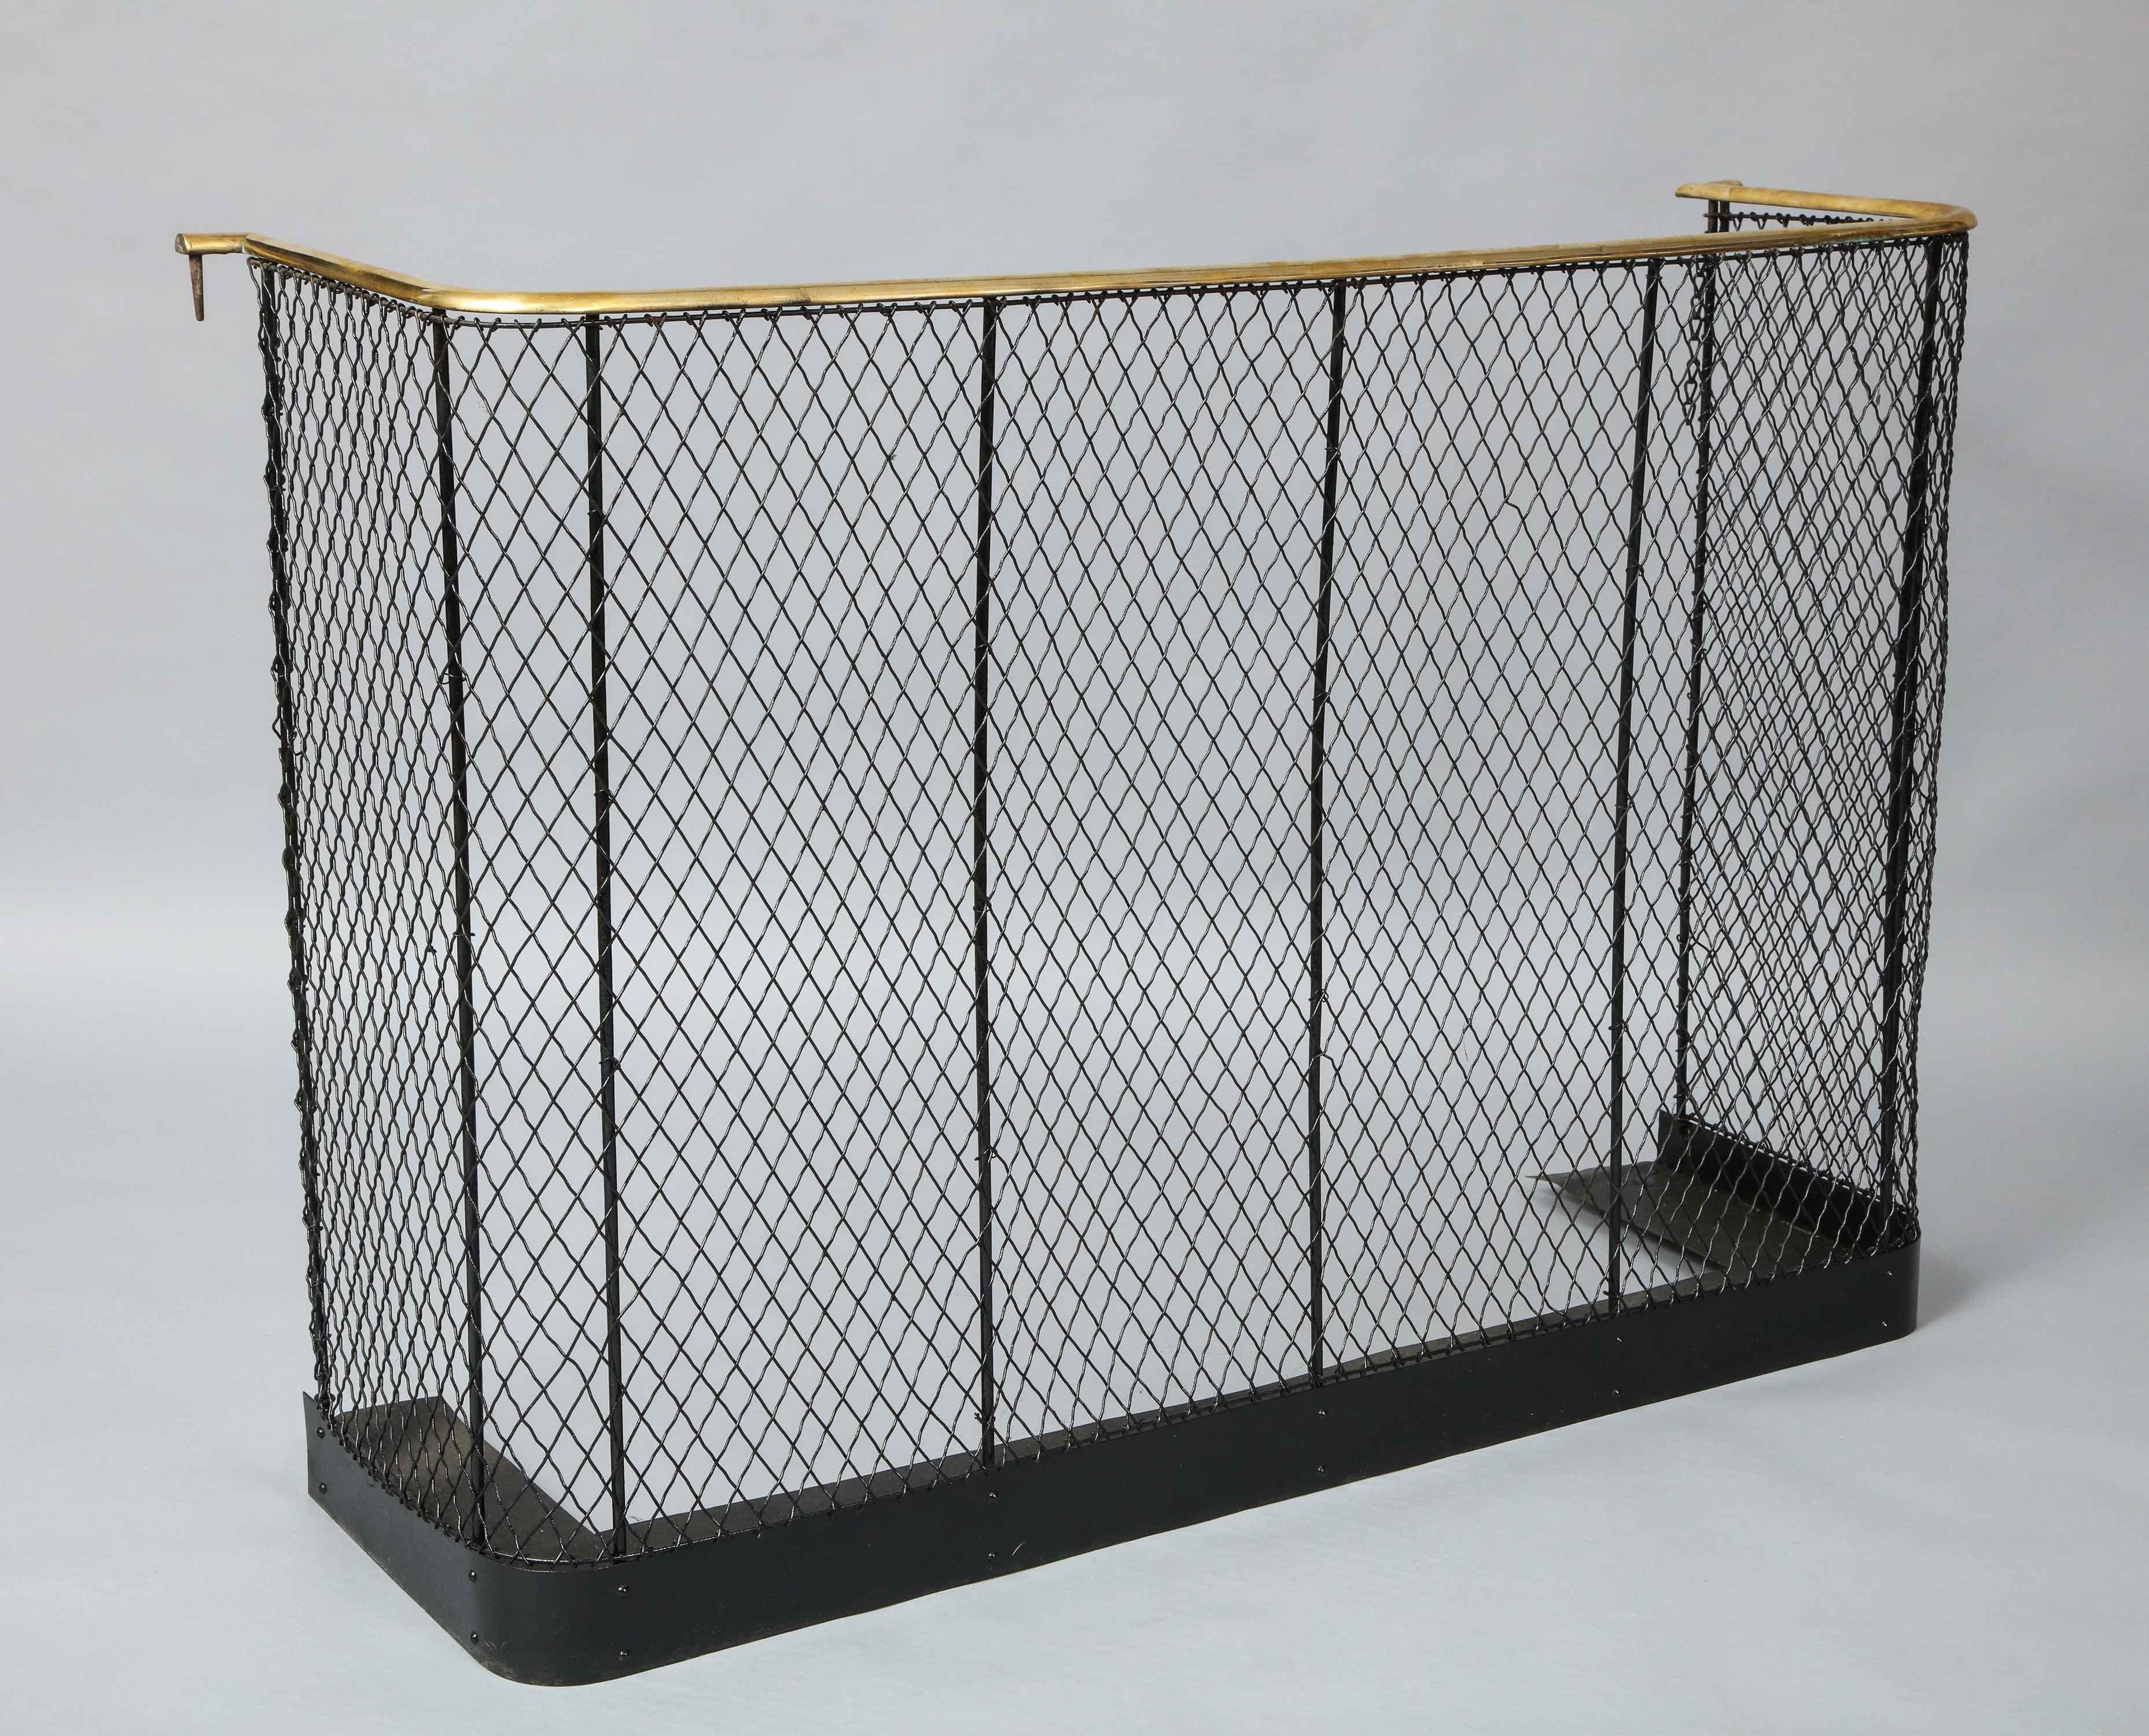 Very good quality English mid-19th century brass, wrought iron and wire nursery of heavy gauge construction, the brass rail over fishnet pattern wire work on sturdy wrought iron frame and with shaped iron plate forming platform base.

Measures: